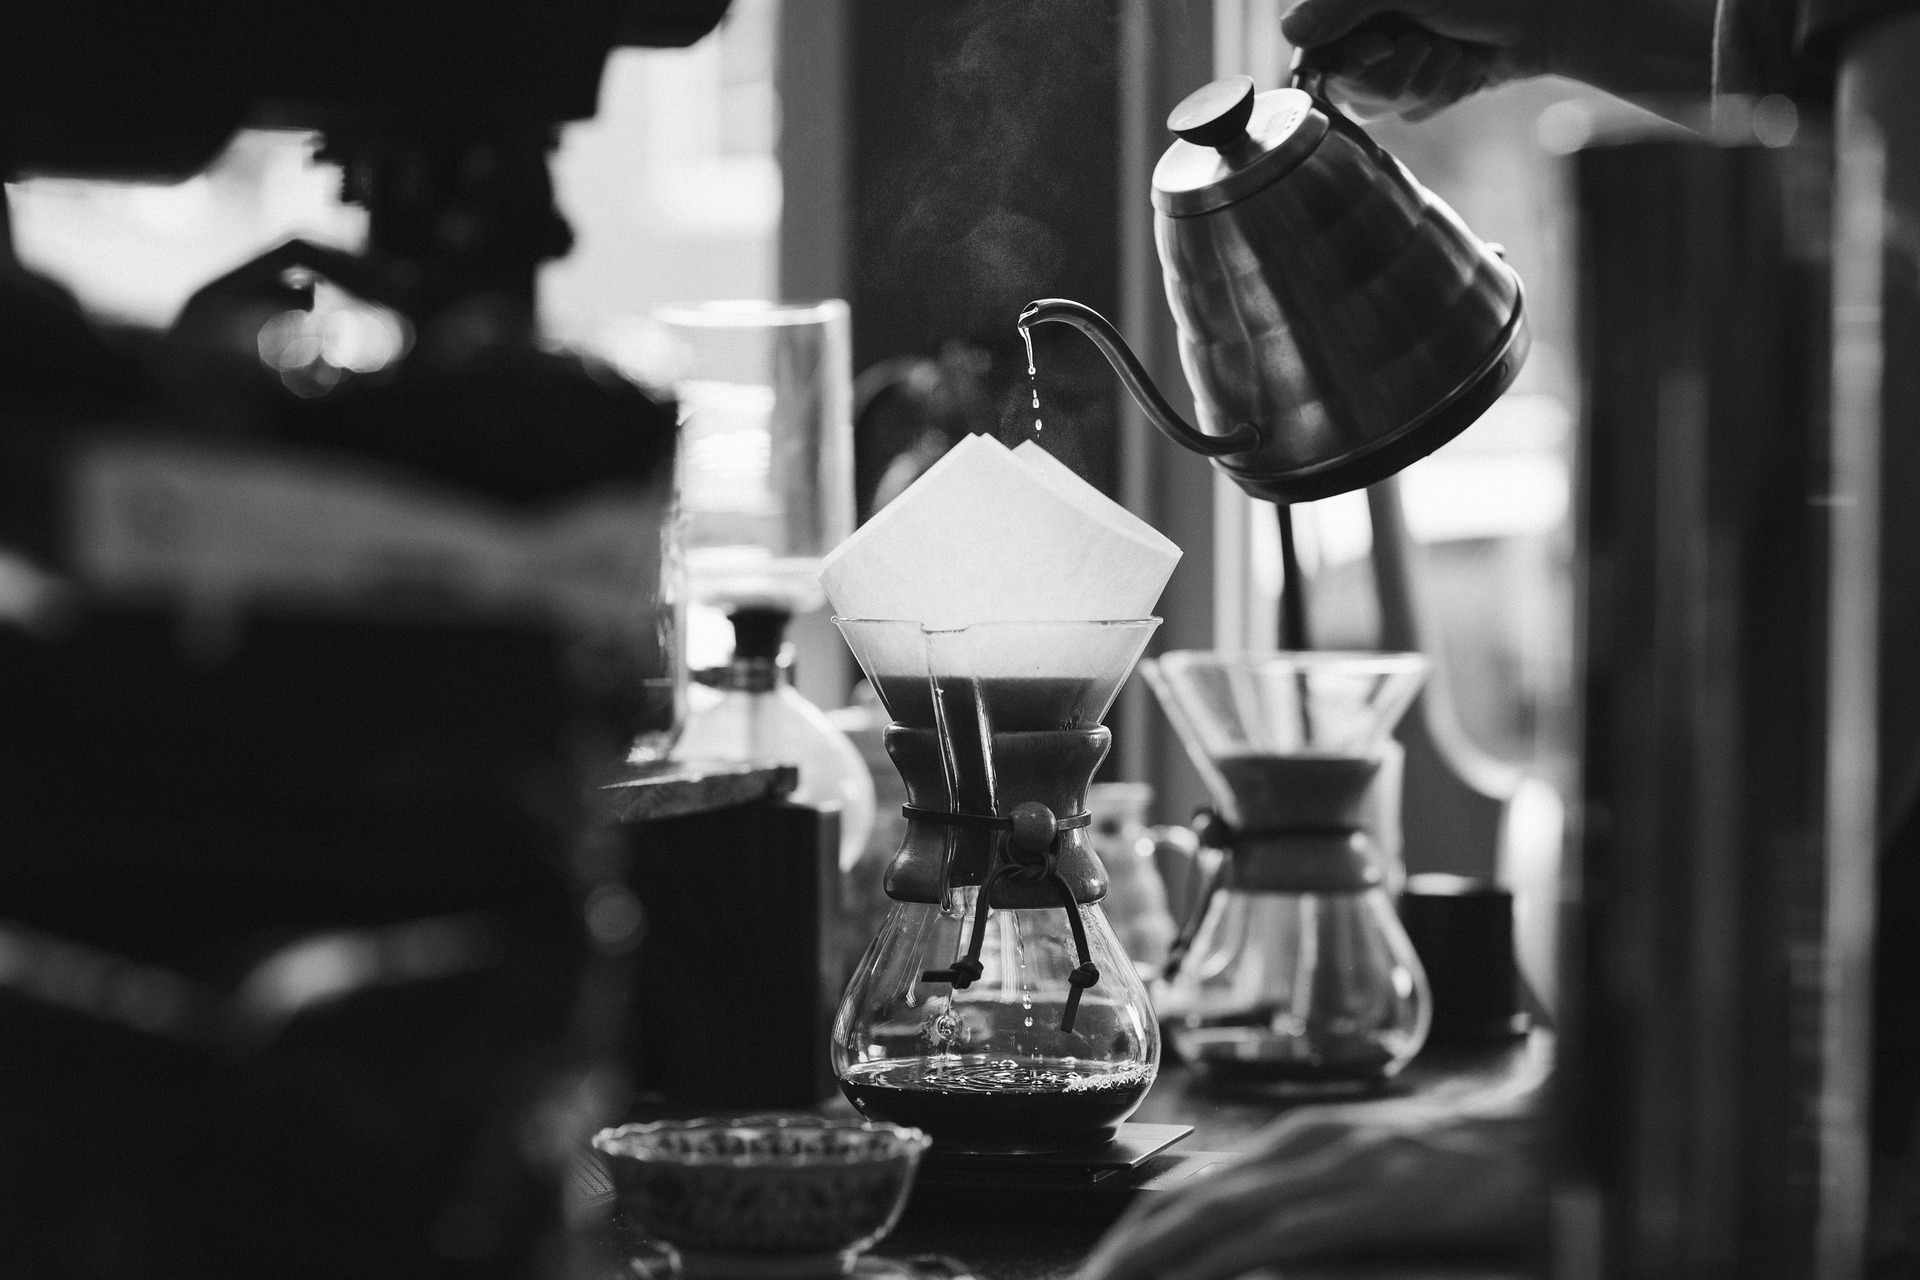 A barista pours hot water over grounds in a Chemex coffemaker in a cafe